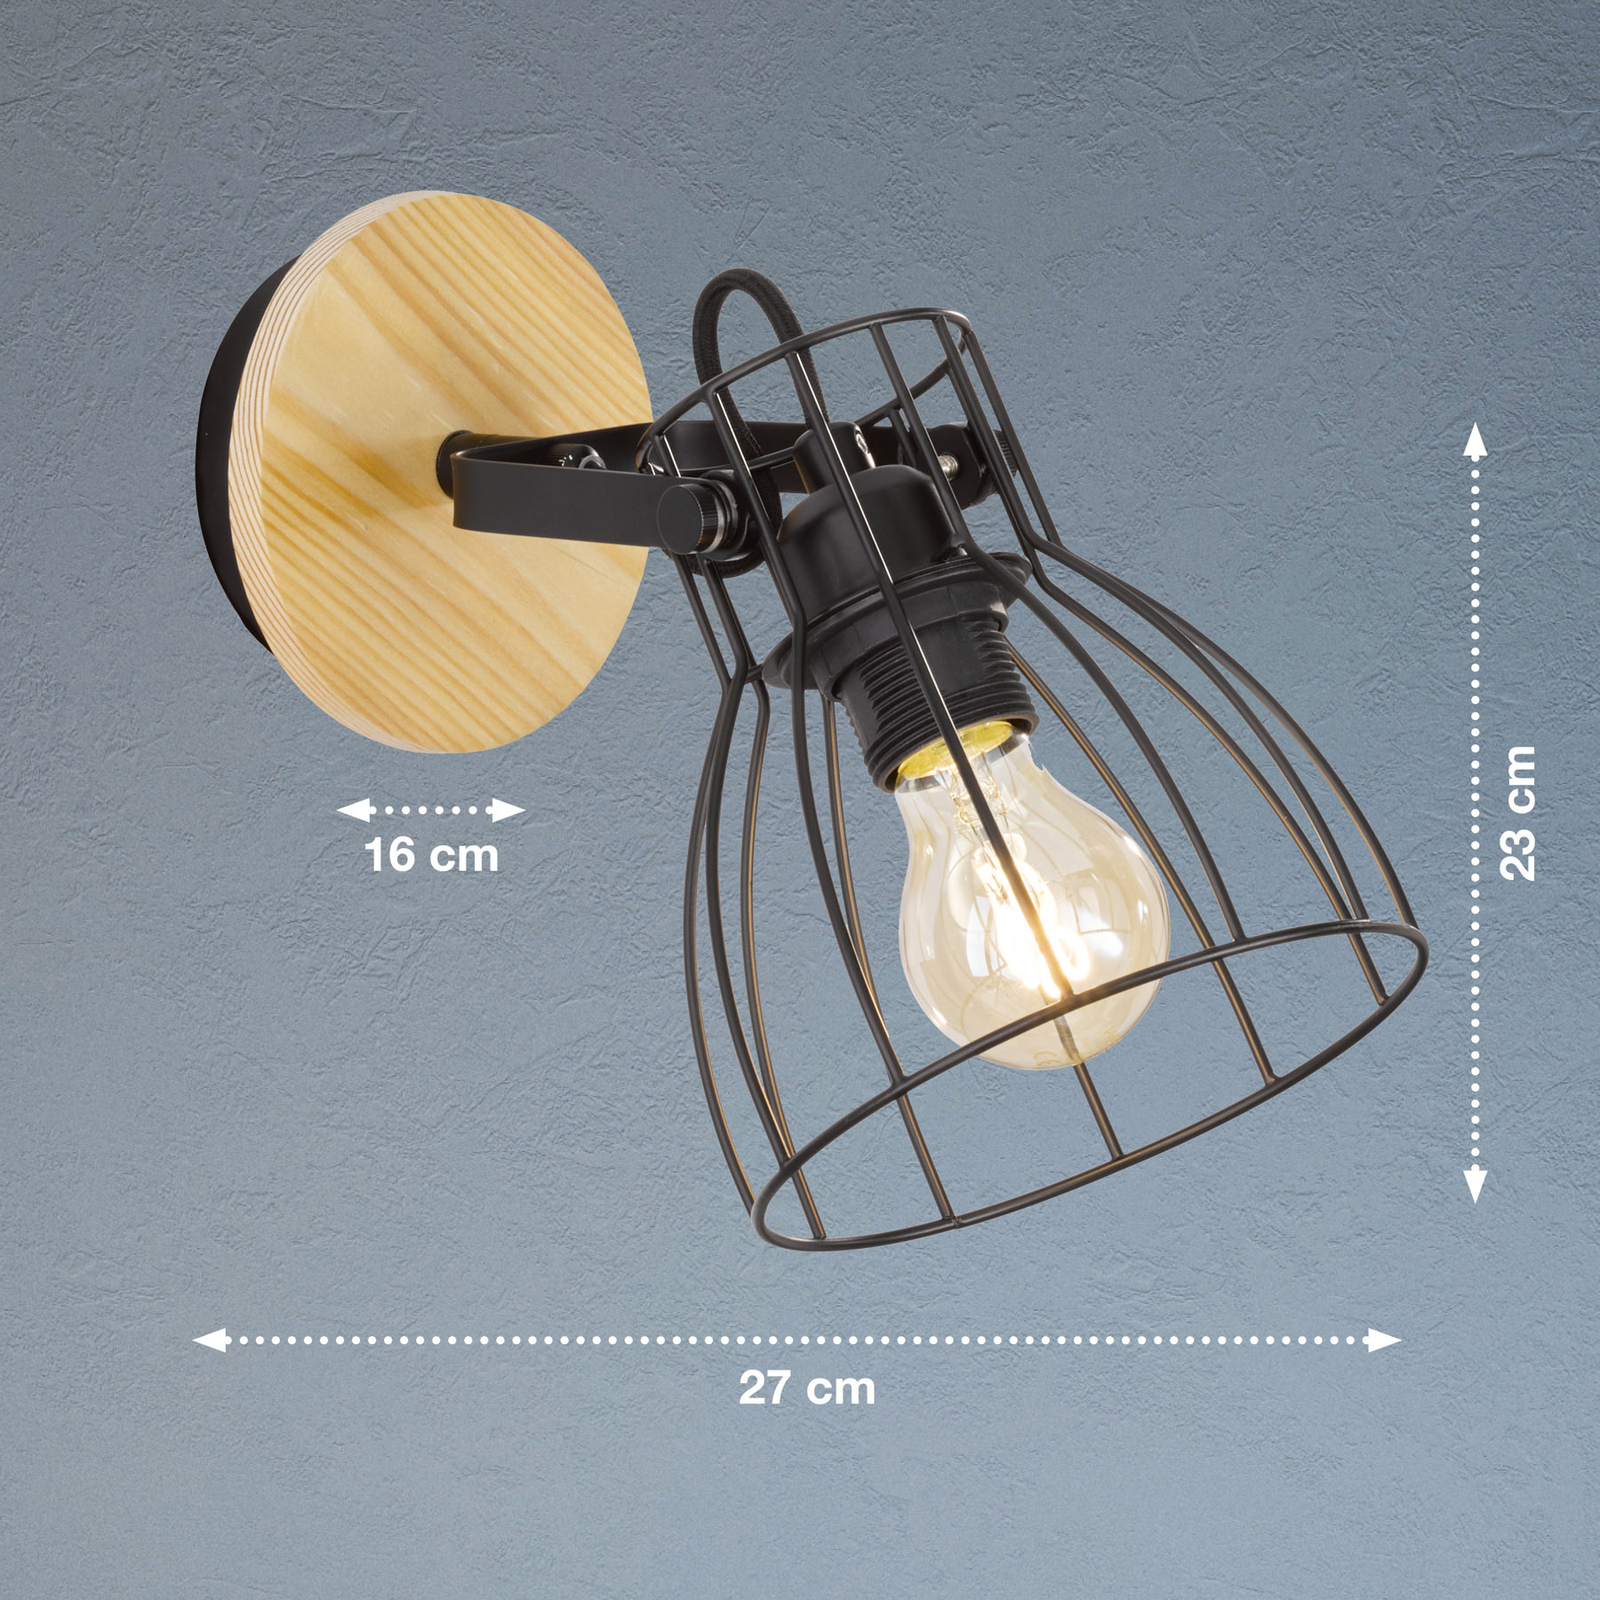 Die wall light with wood finish and cage lampshade